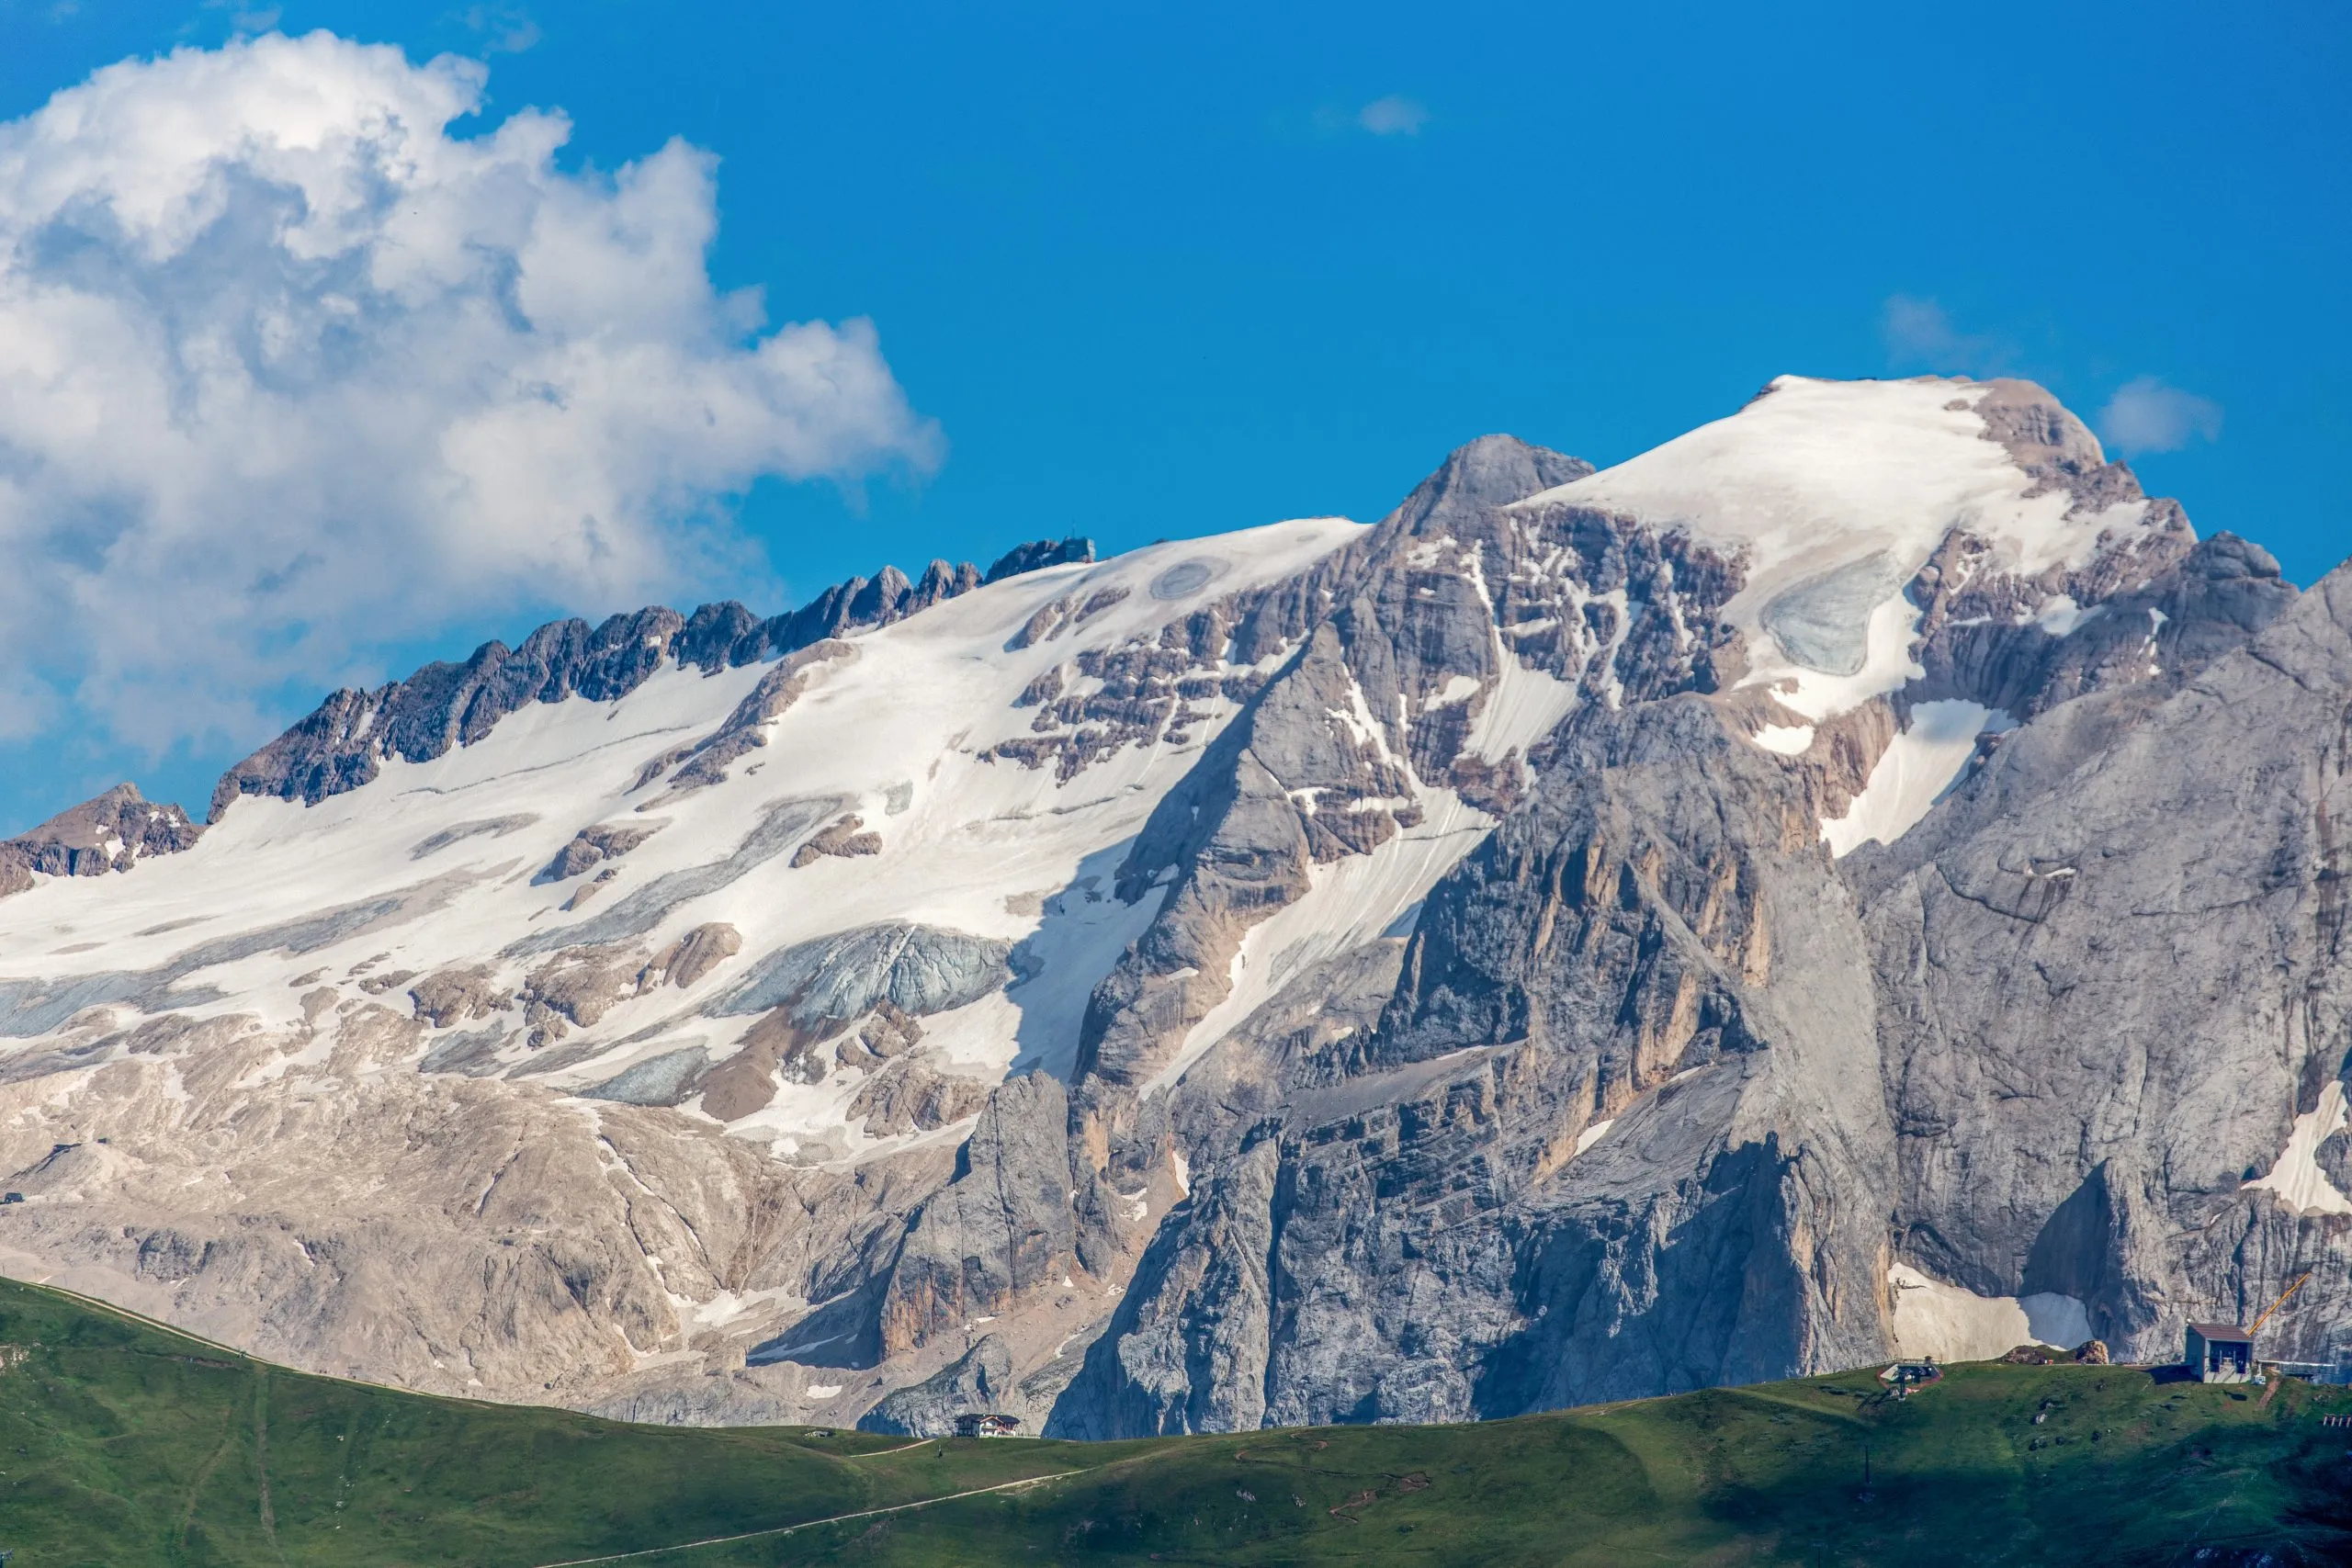 Marmolada named as the Queen of the Dolomites is a mountainous mountain group of the Alps, the highest in the Dolomites, reaching the highest point with Punta Penia (3,343 m). italy